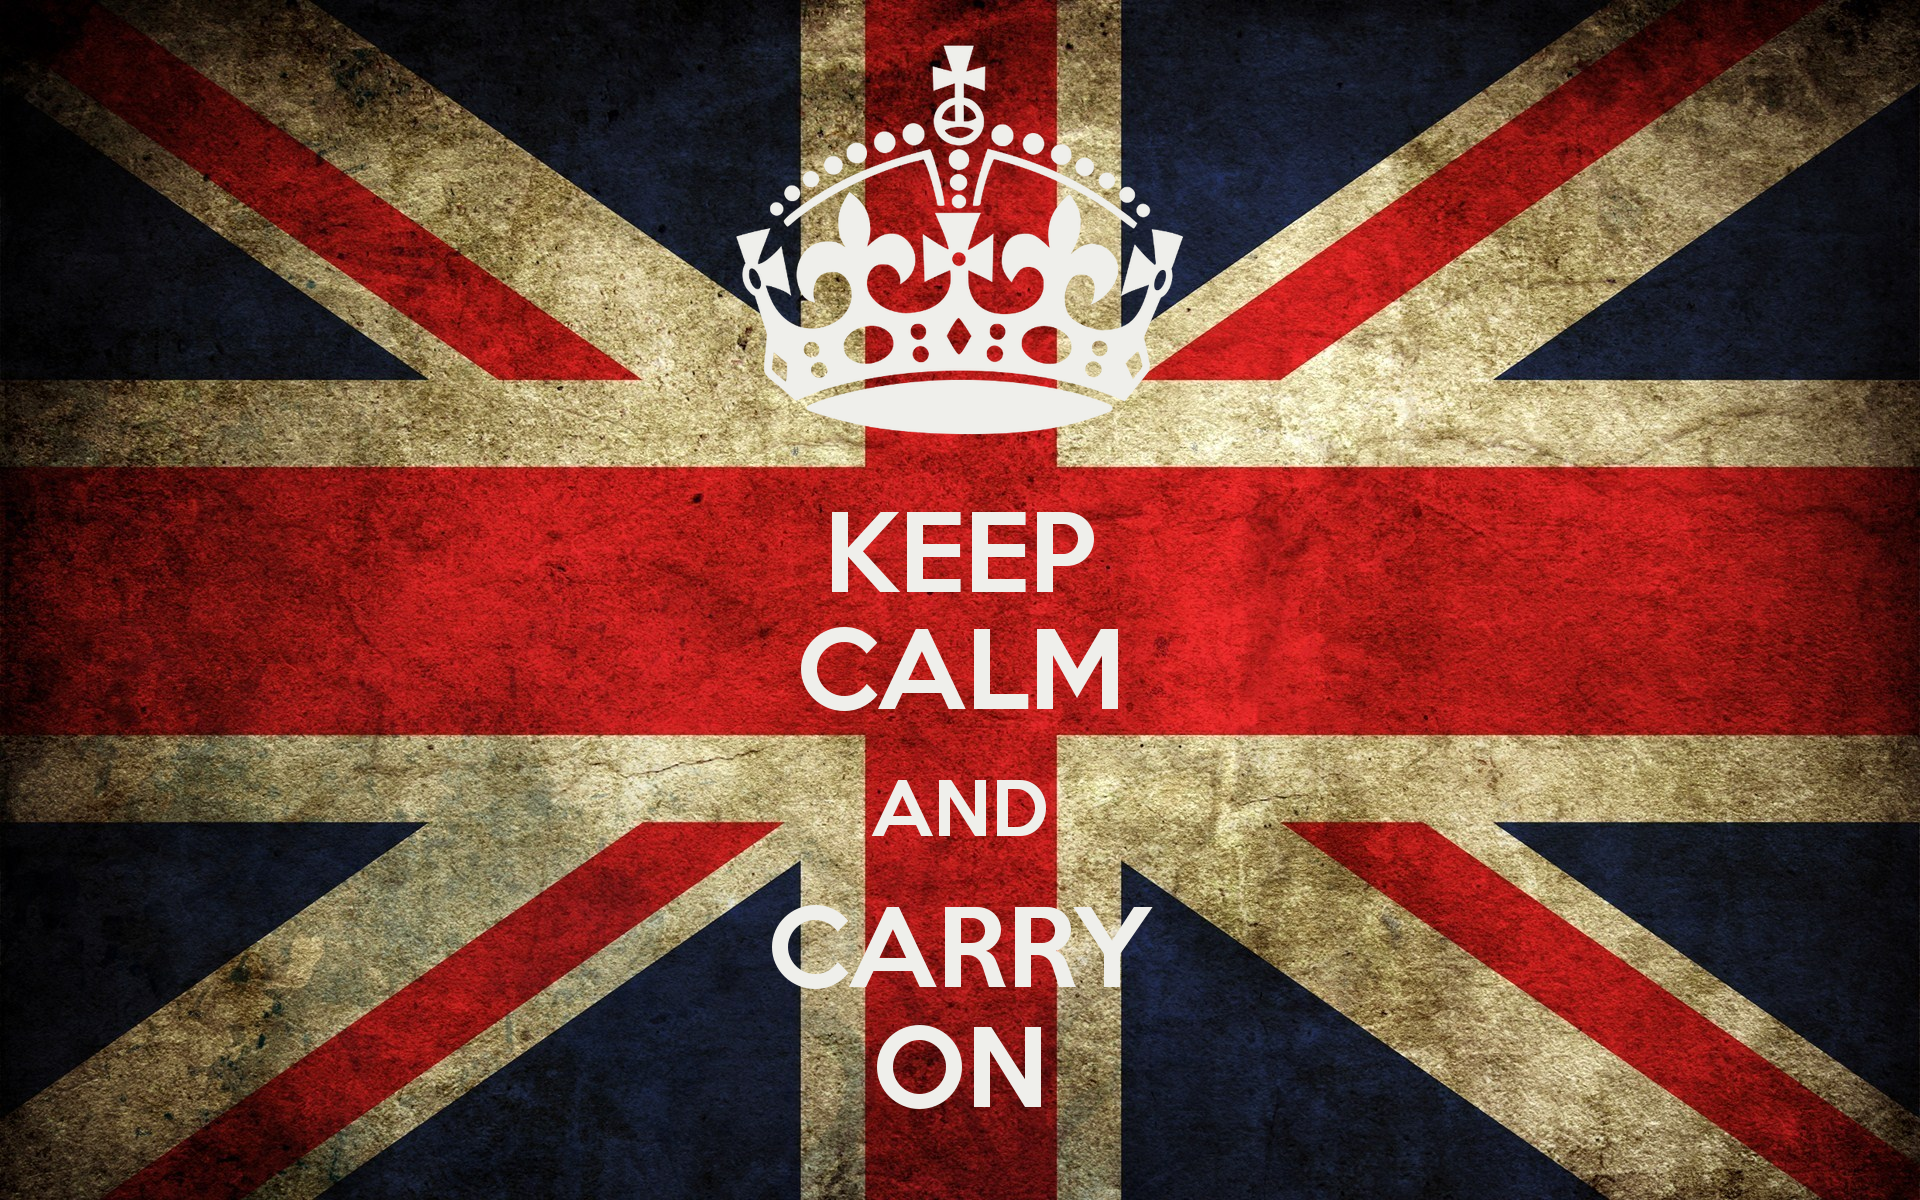 Keep Calm And Carry On Image Generator